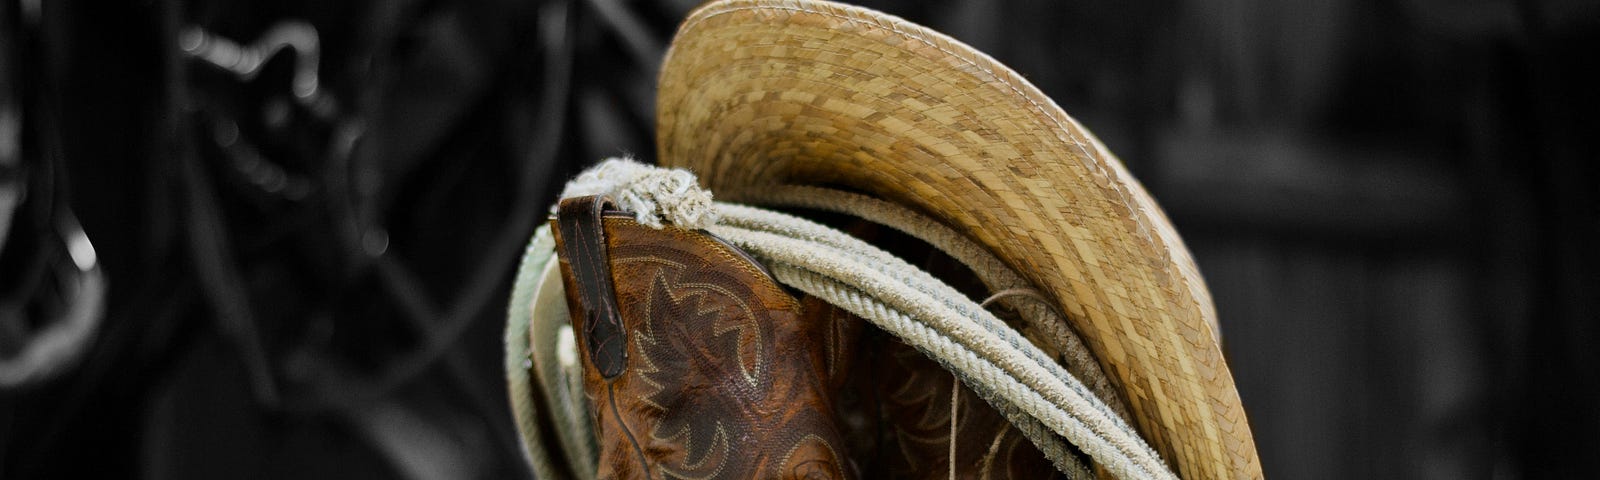 cowboy boots, a hat, and a lariat